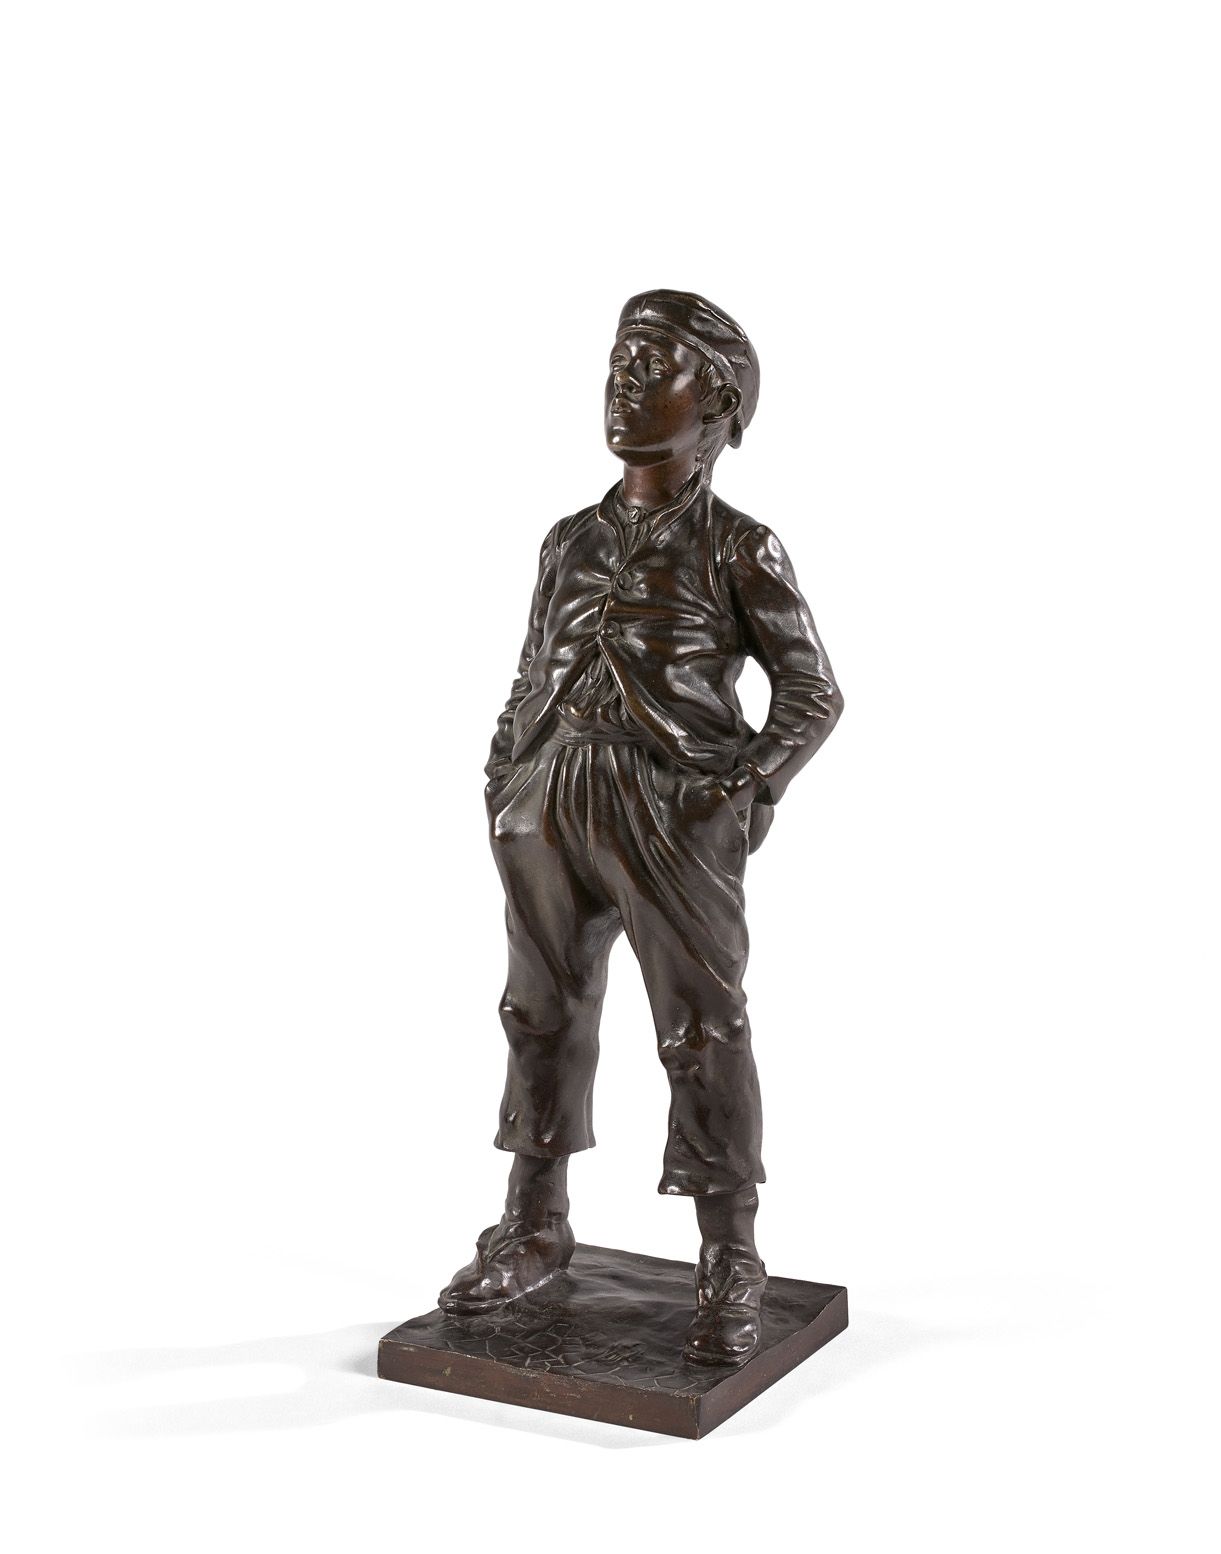 Null late 19th century school

Whistling kid from Paris

Bronze with brown patin&hellip;